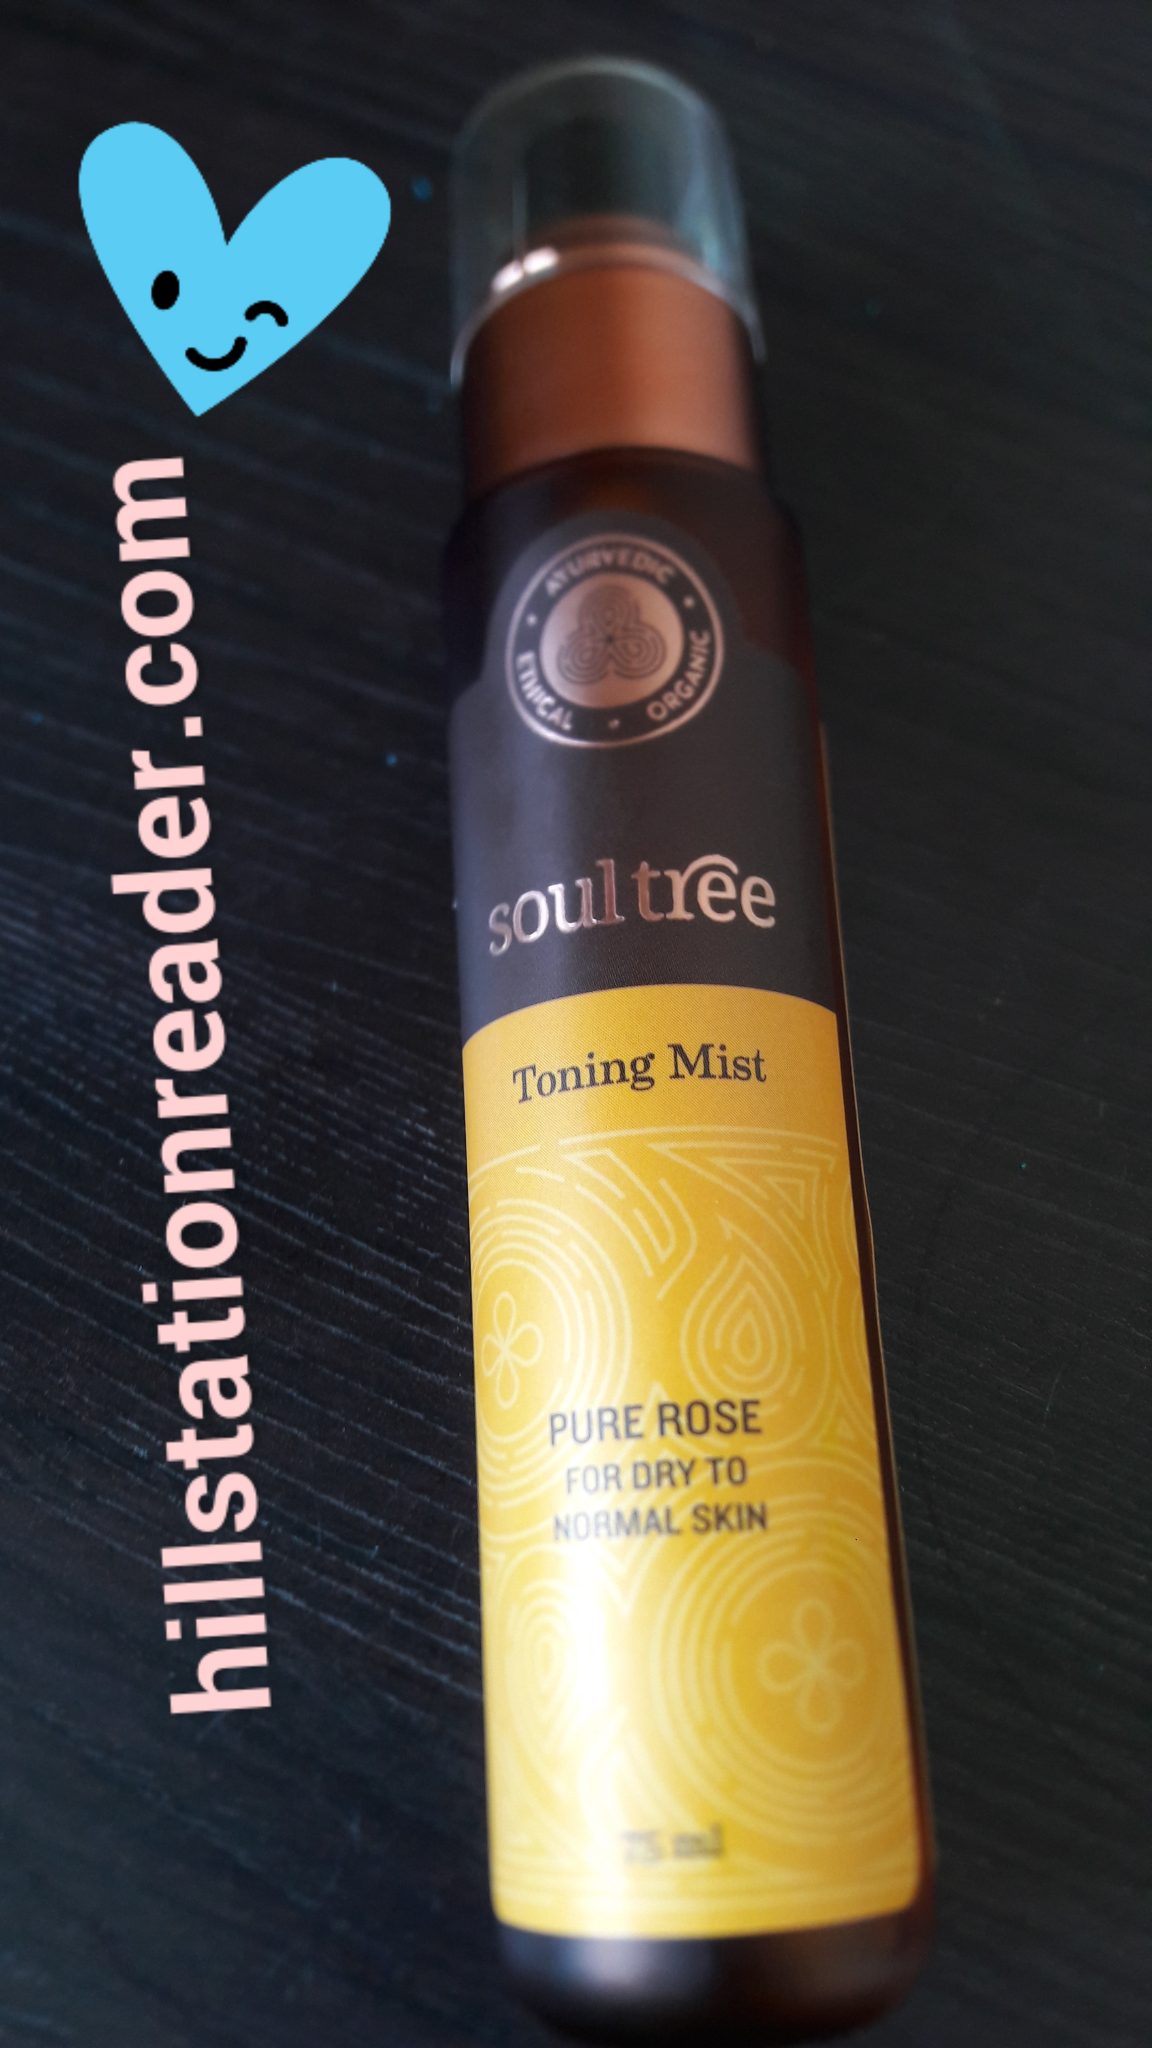 Soultree Toning Mist Review